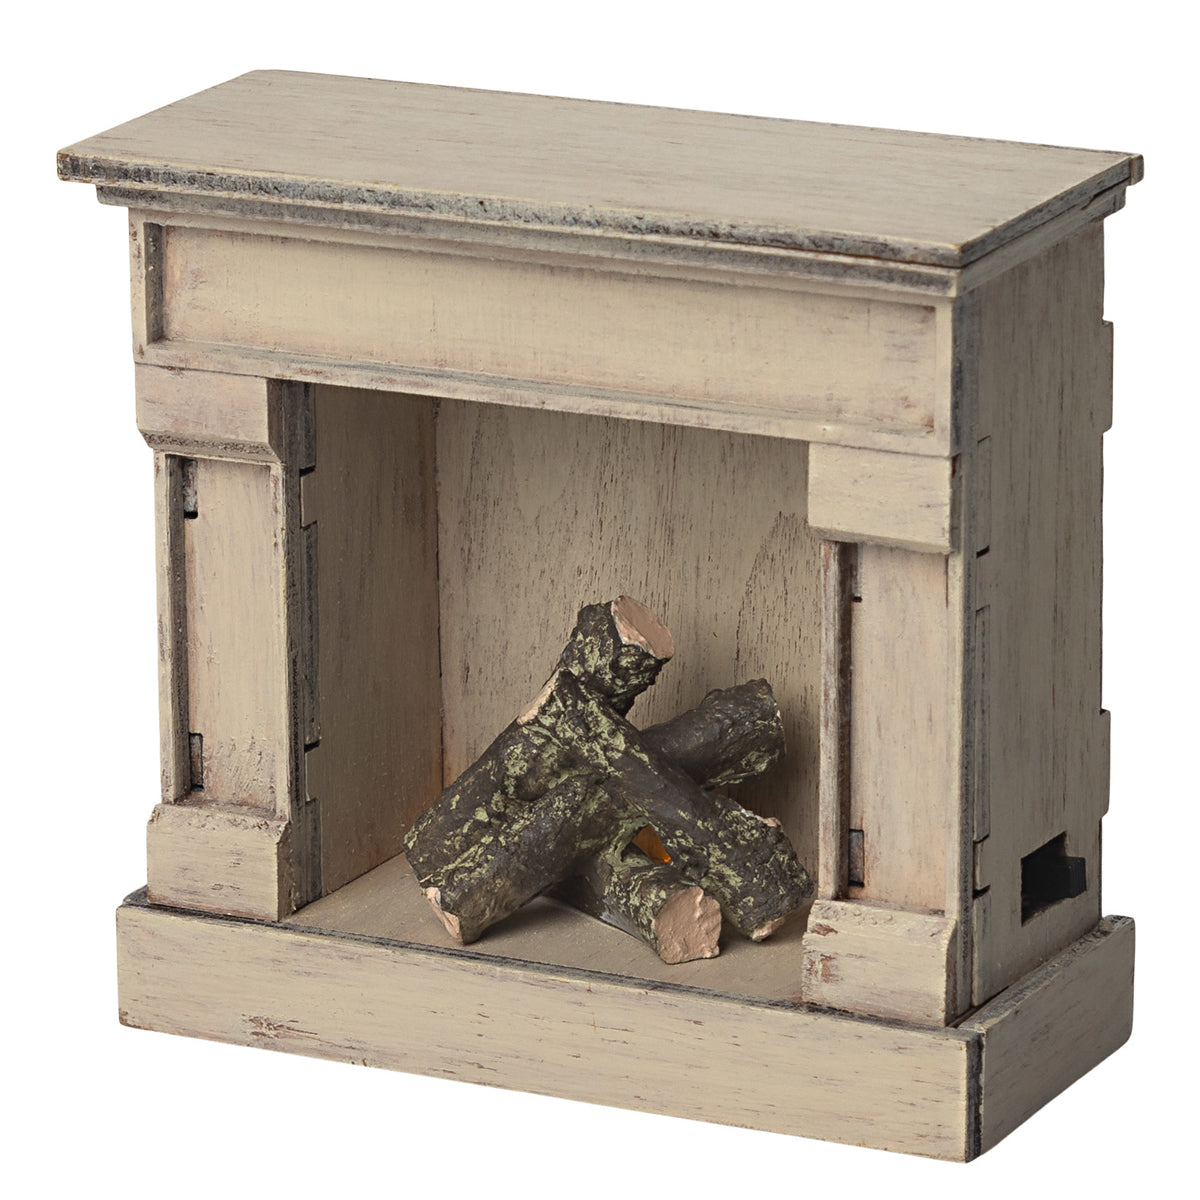 Maileg Fireplace - Off white Dollhouse furniture